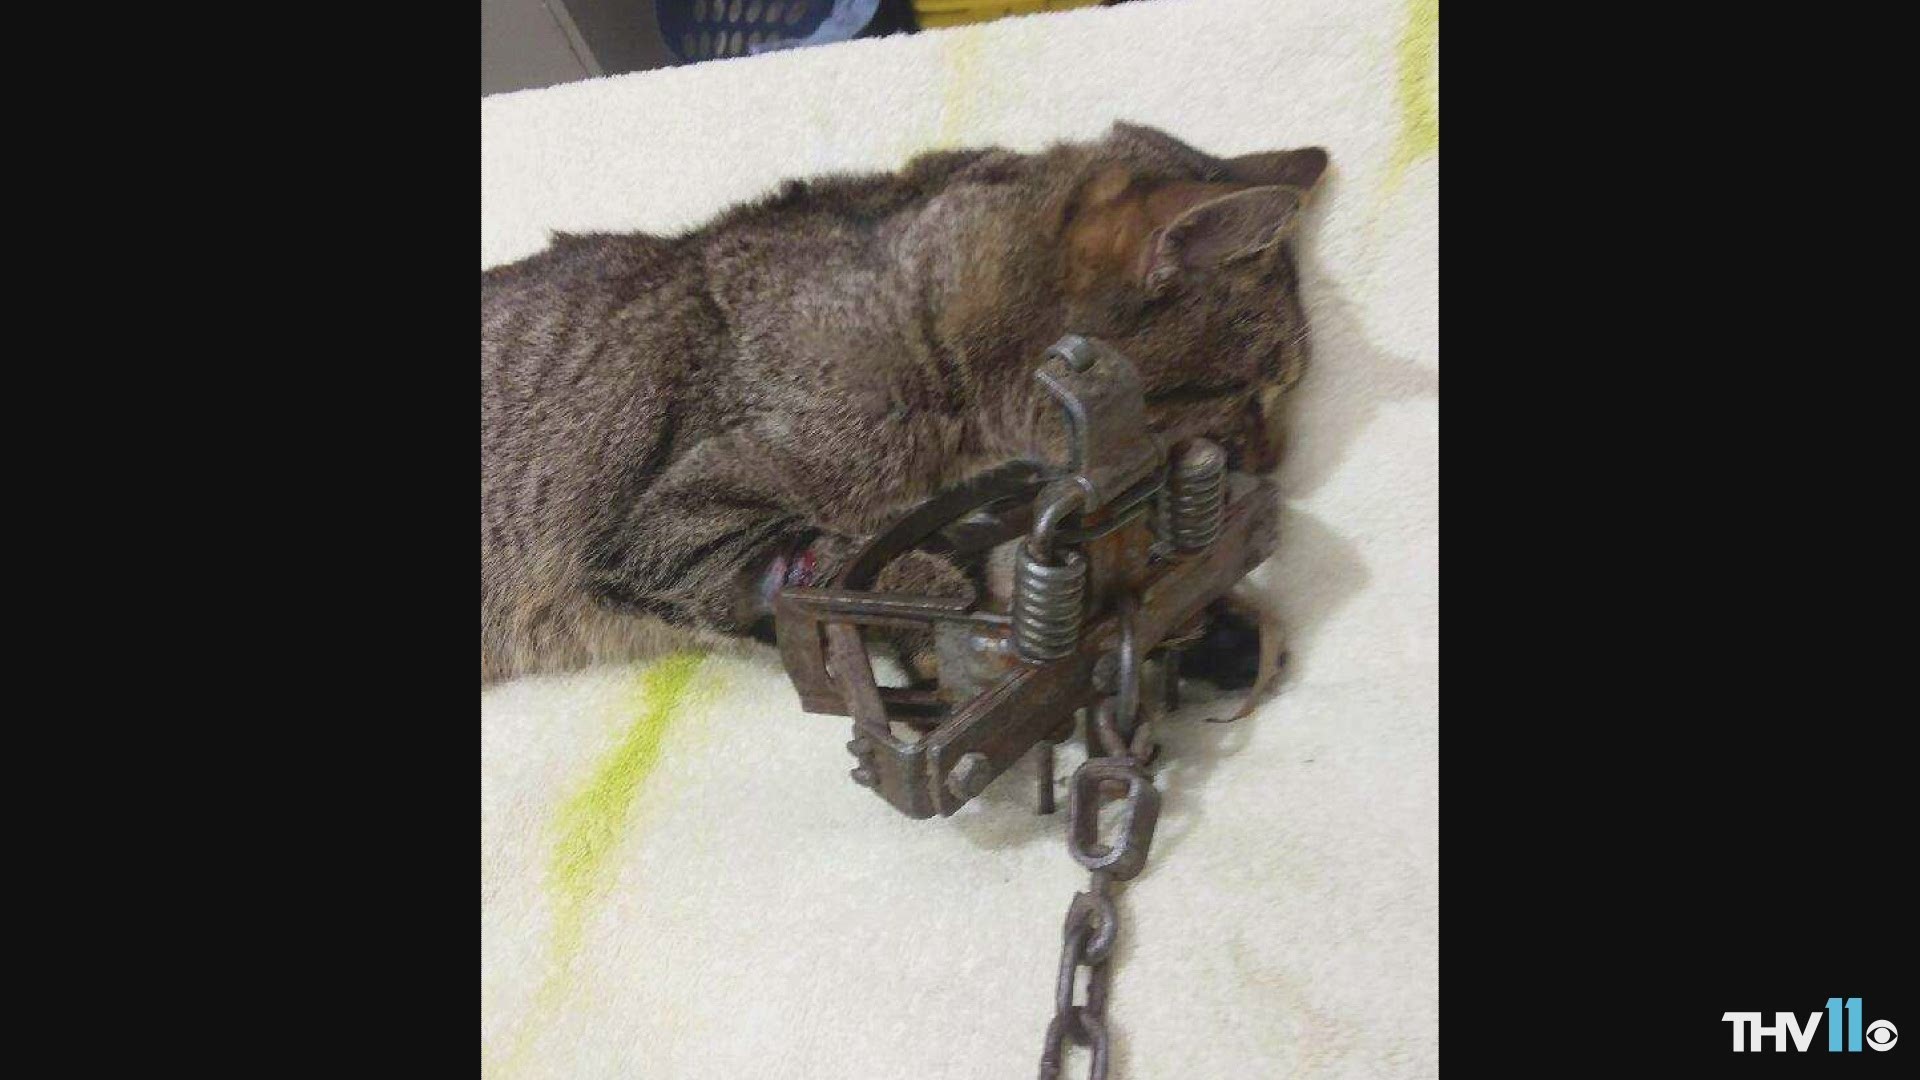 Cat caught in illegal trap in Little Rock has leg amputated 